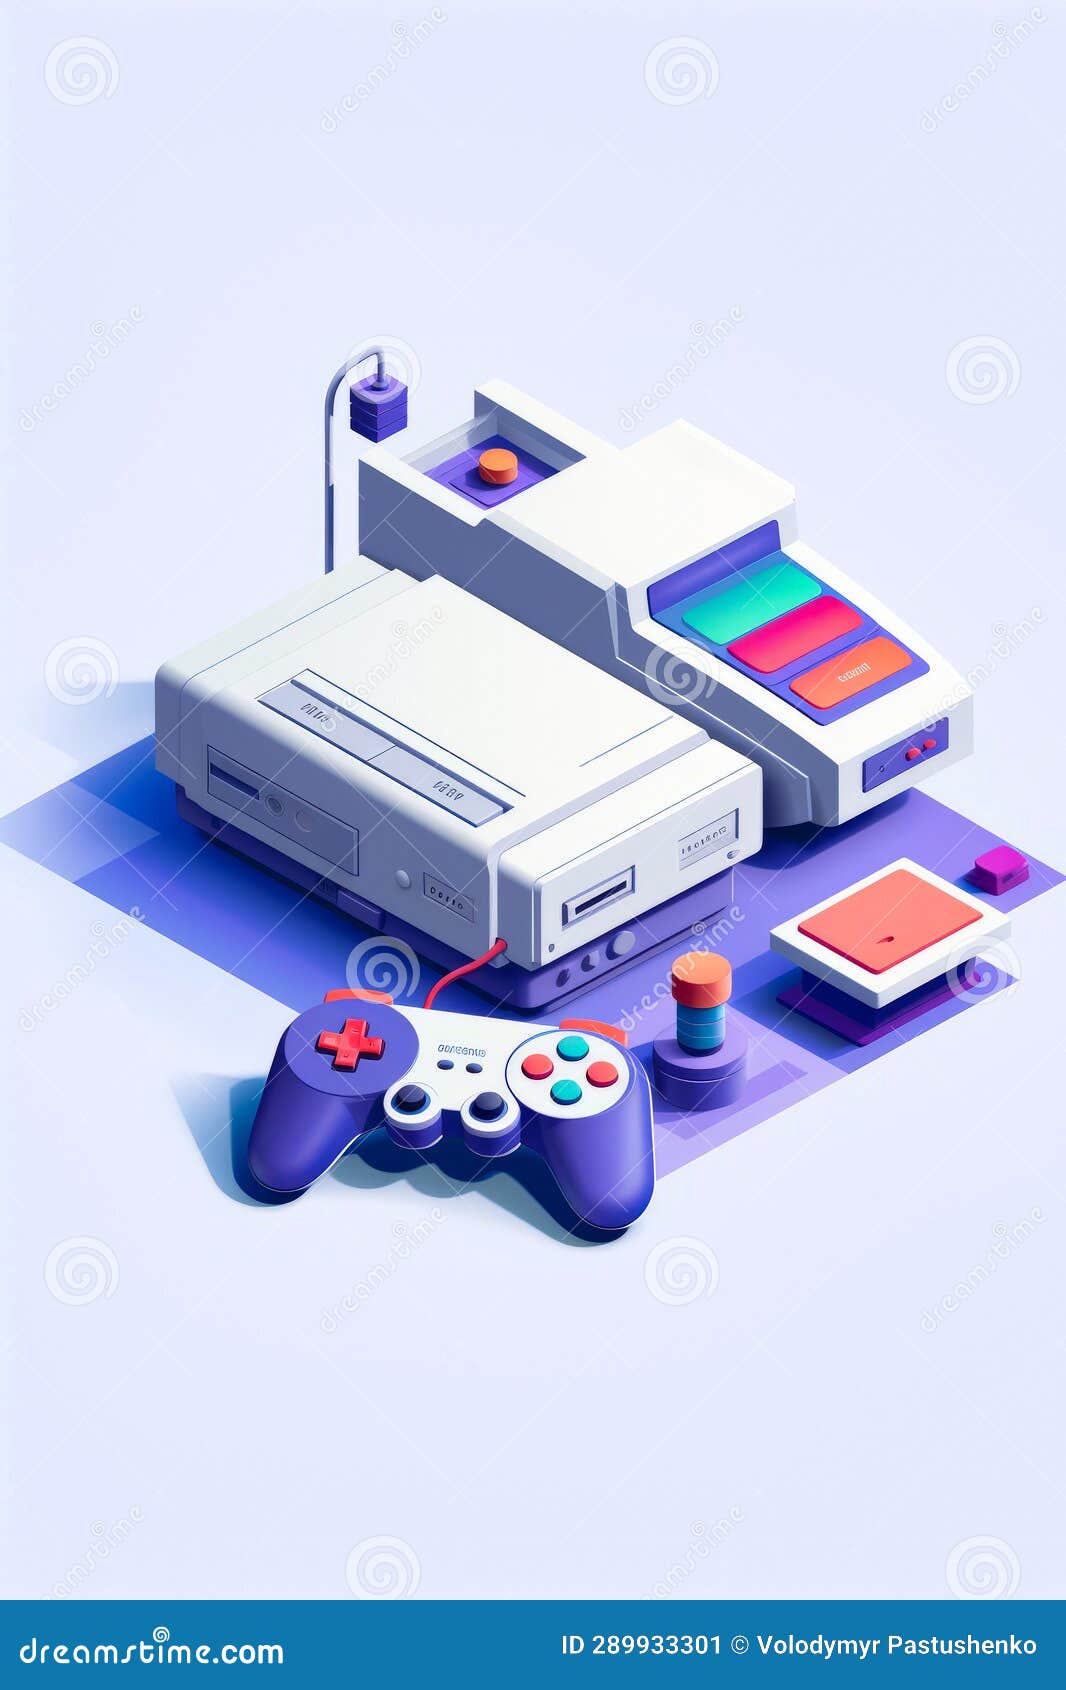 979 Wii Games Images, Stock Photos, 3D objects, & Vectors